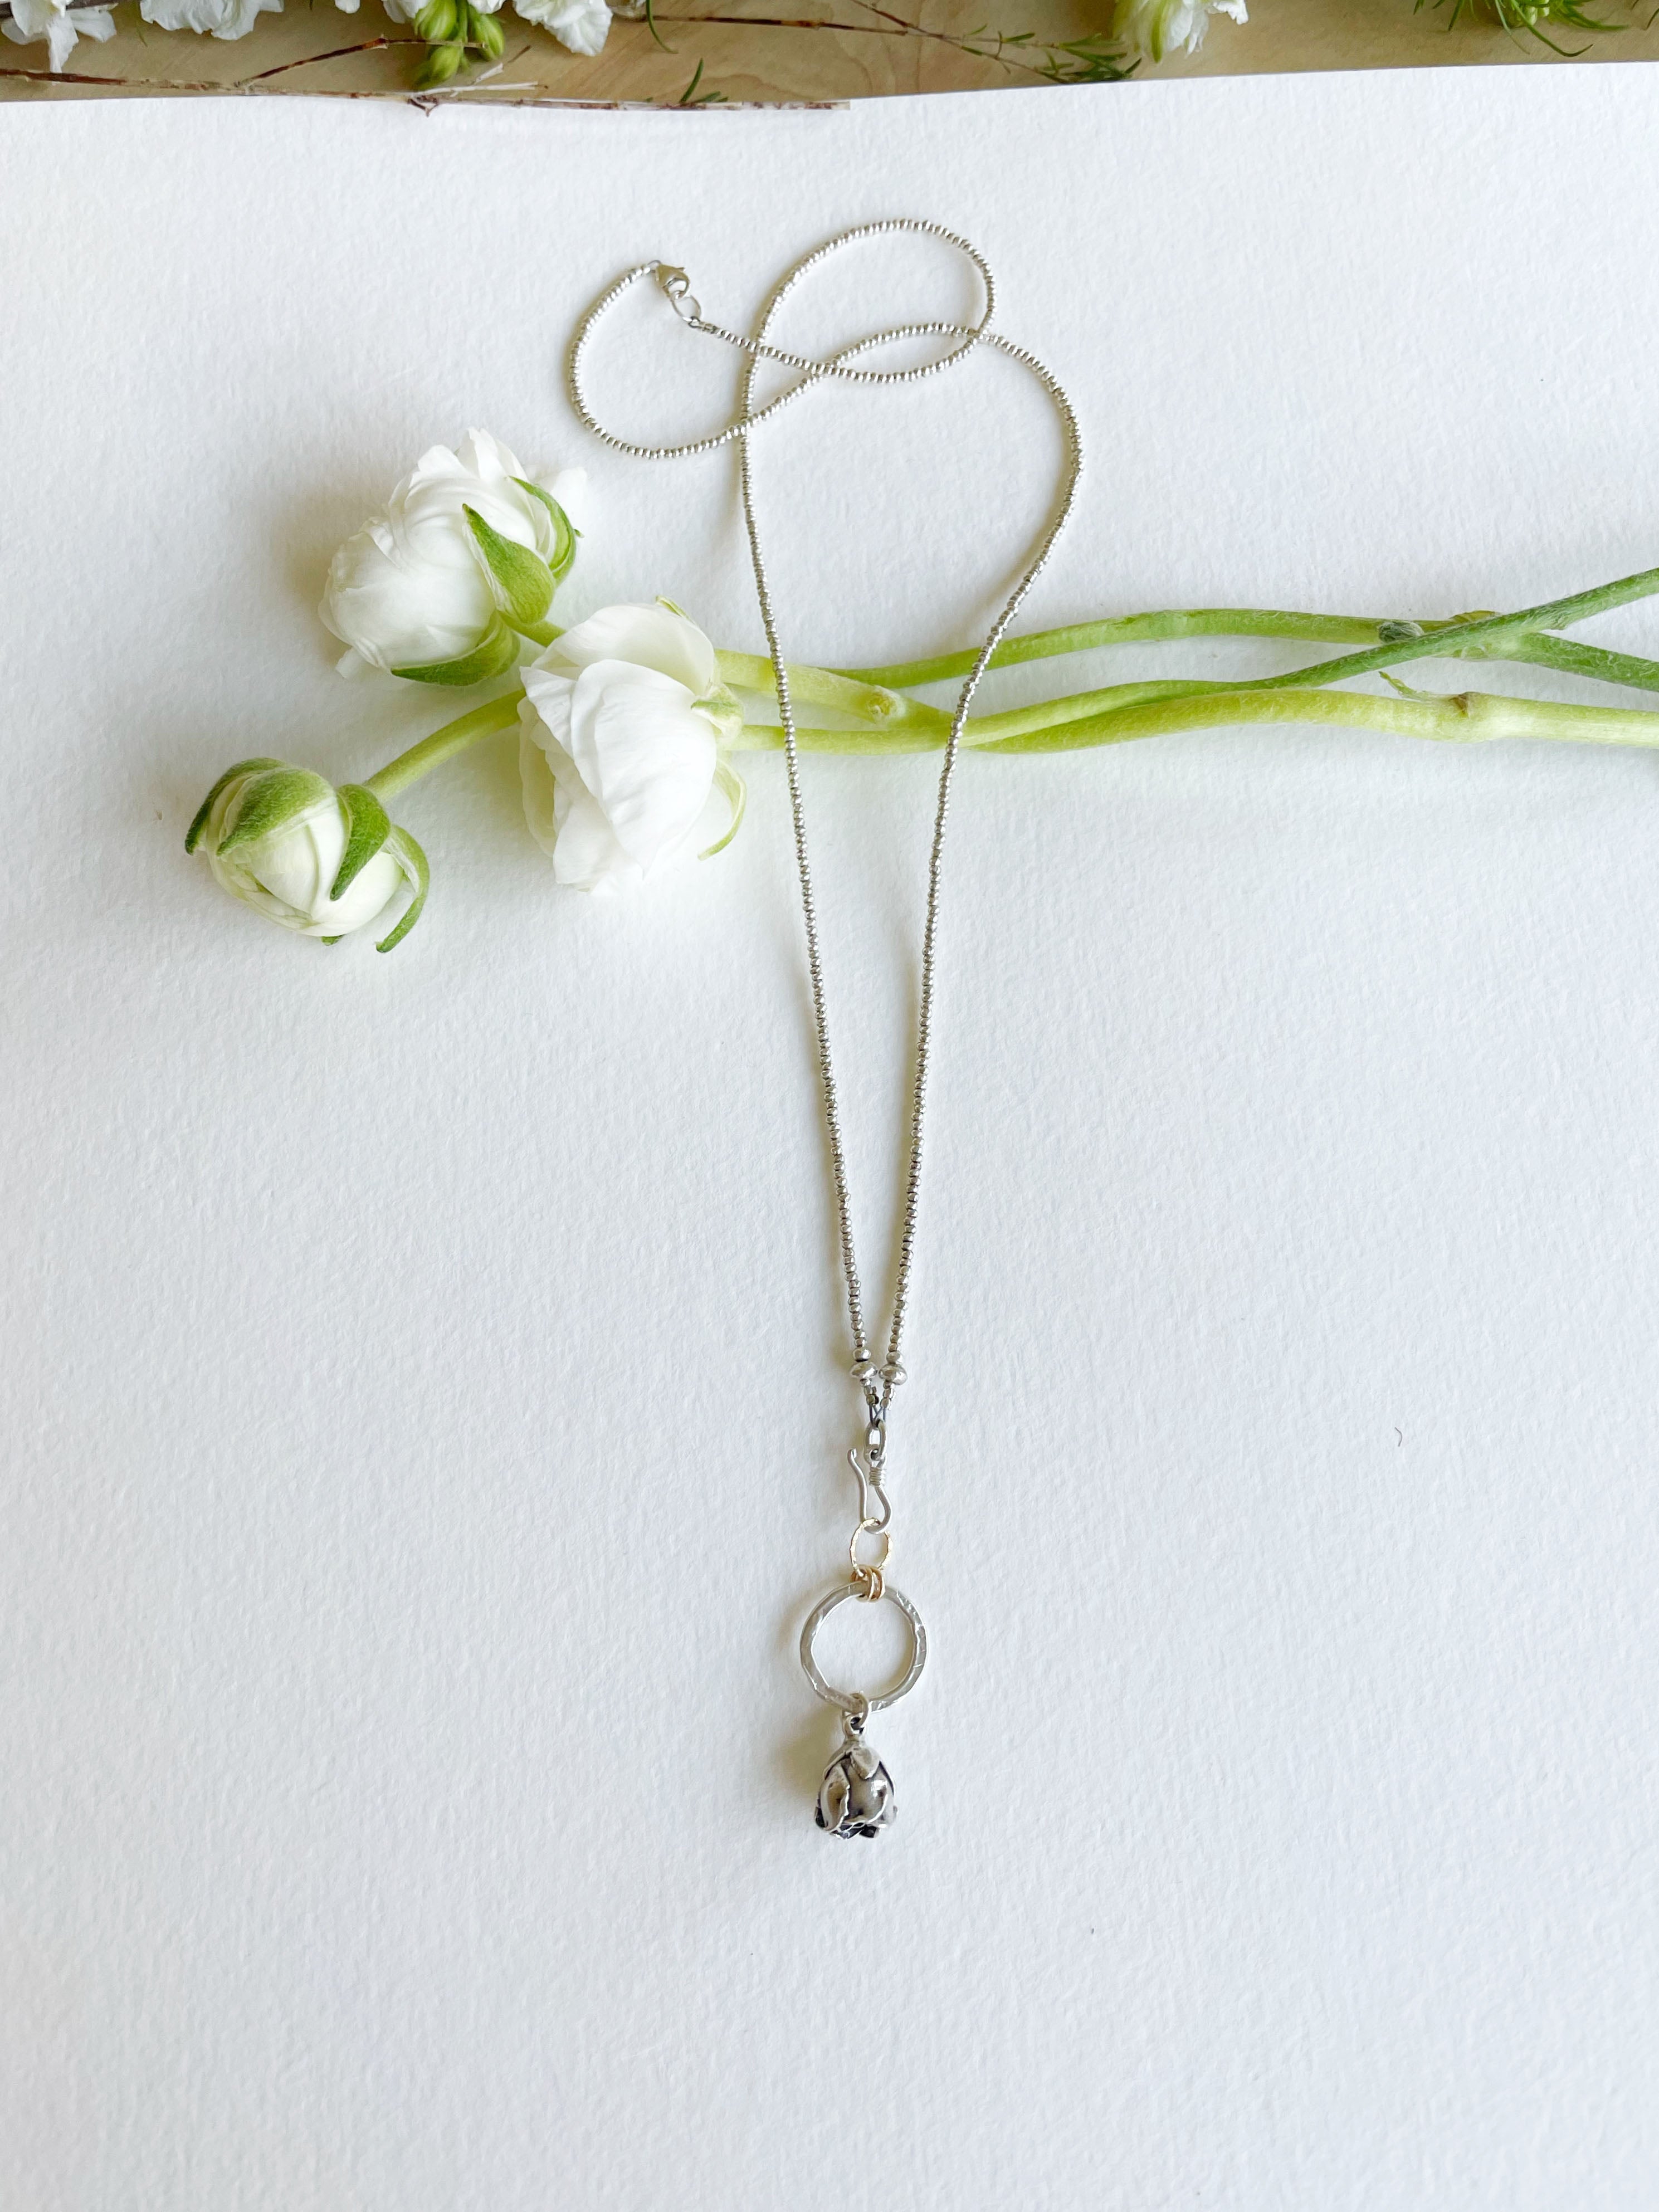 The Growth in Me Necklace - Honey + Ice